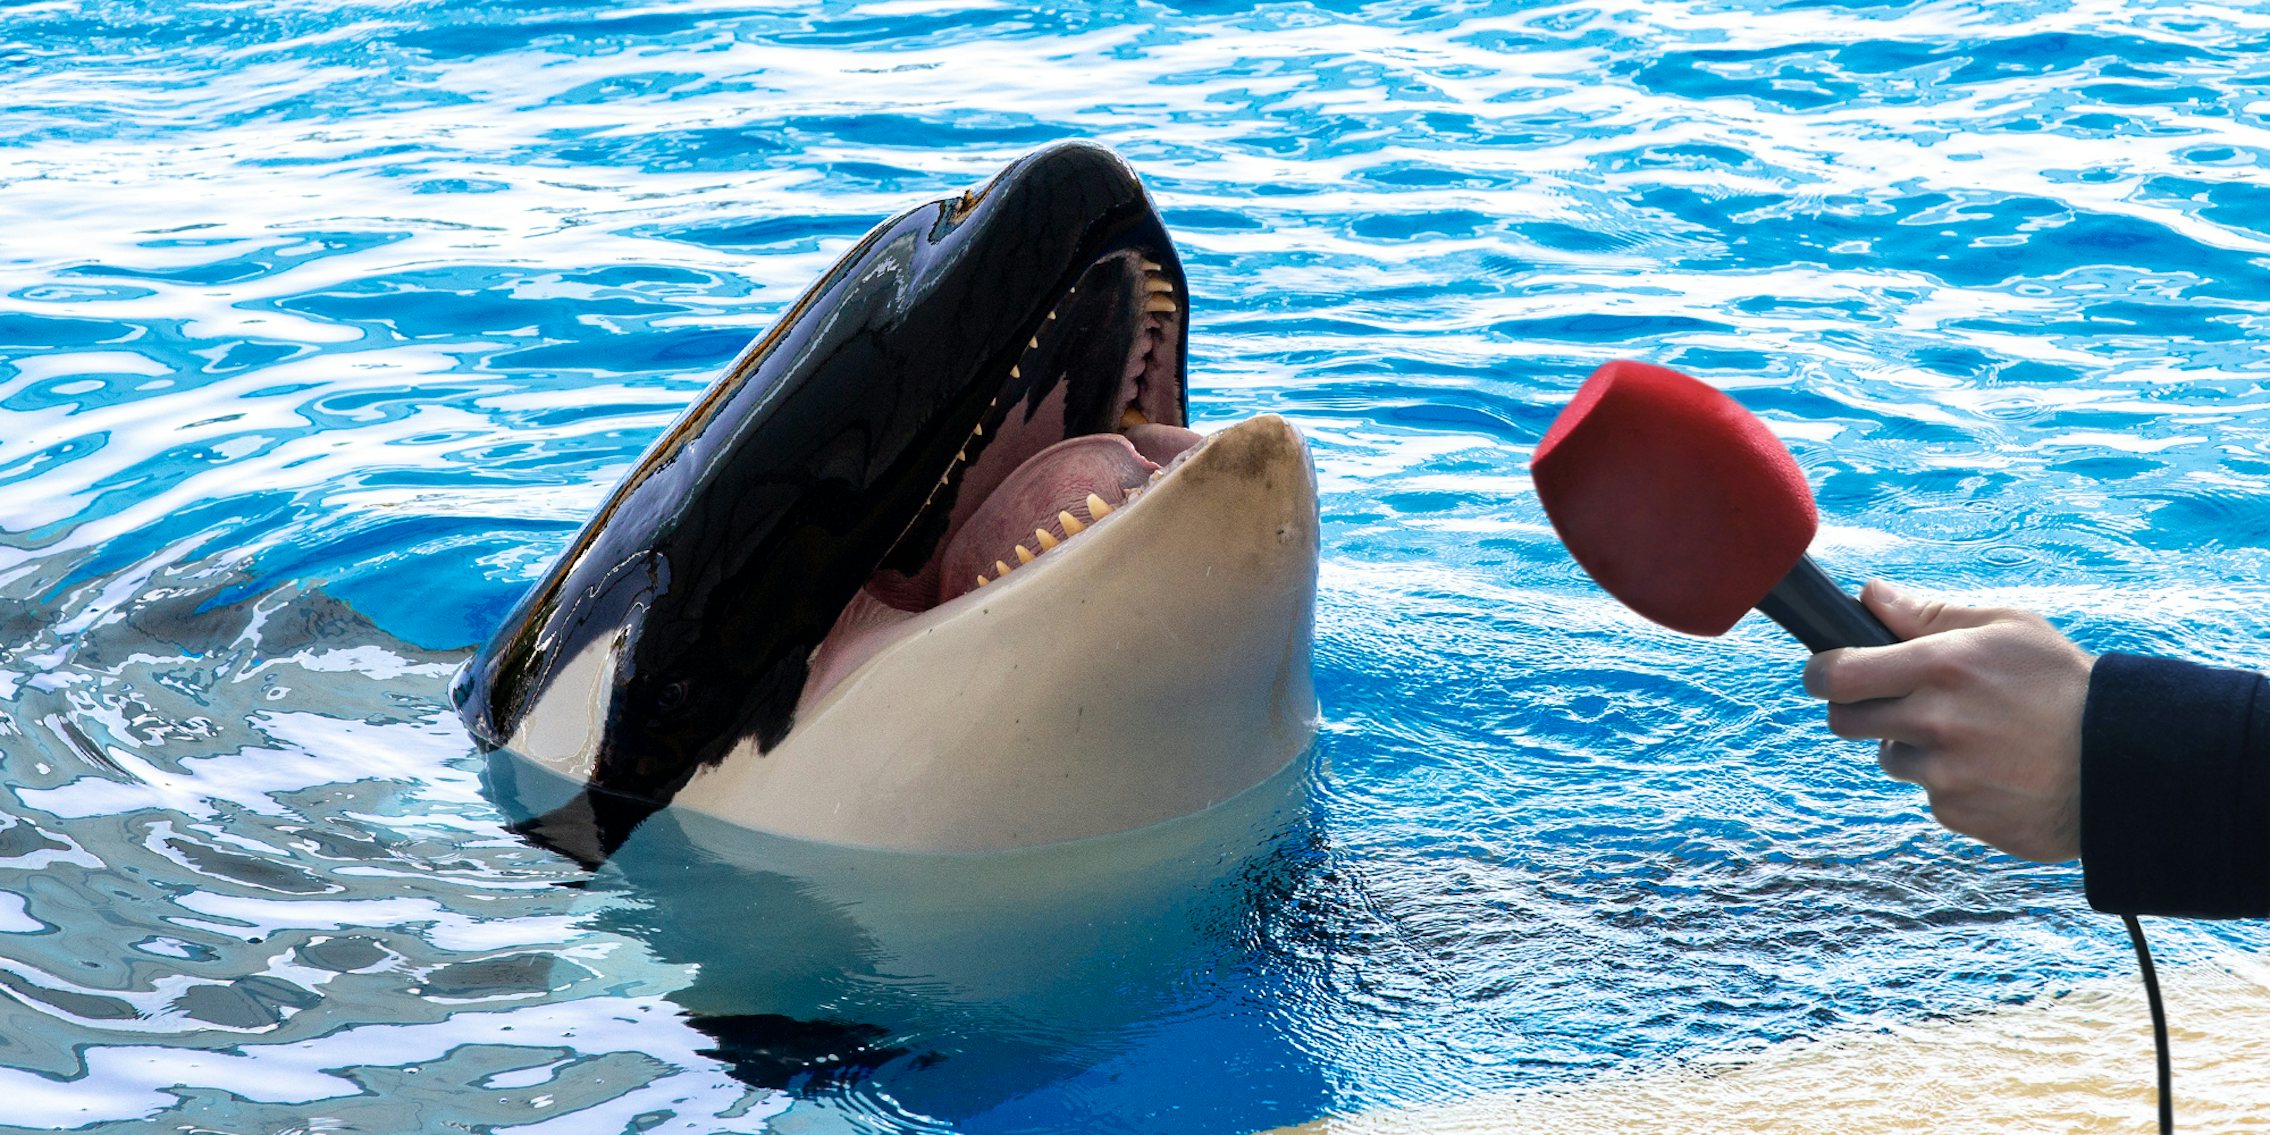 Memes are giving an orca with a microphone a perfect voice